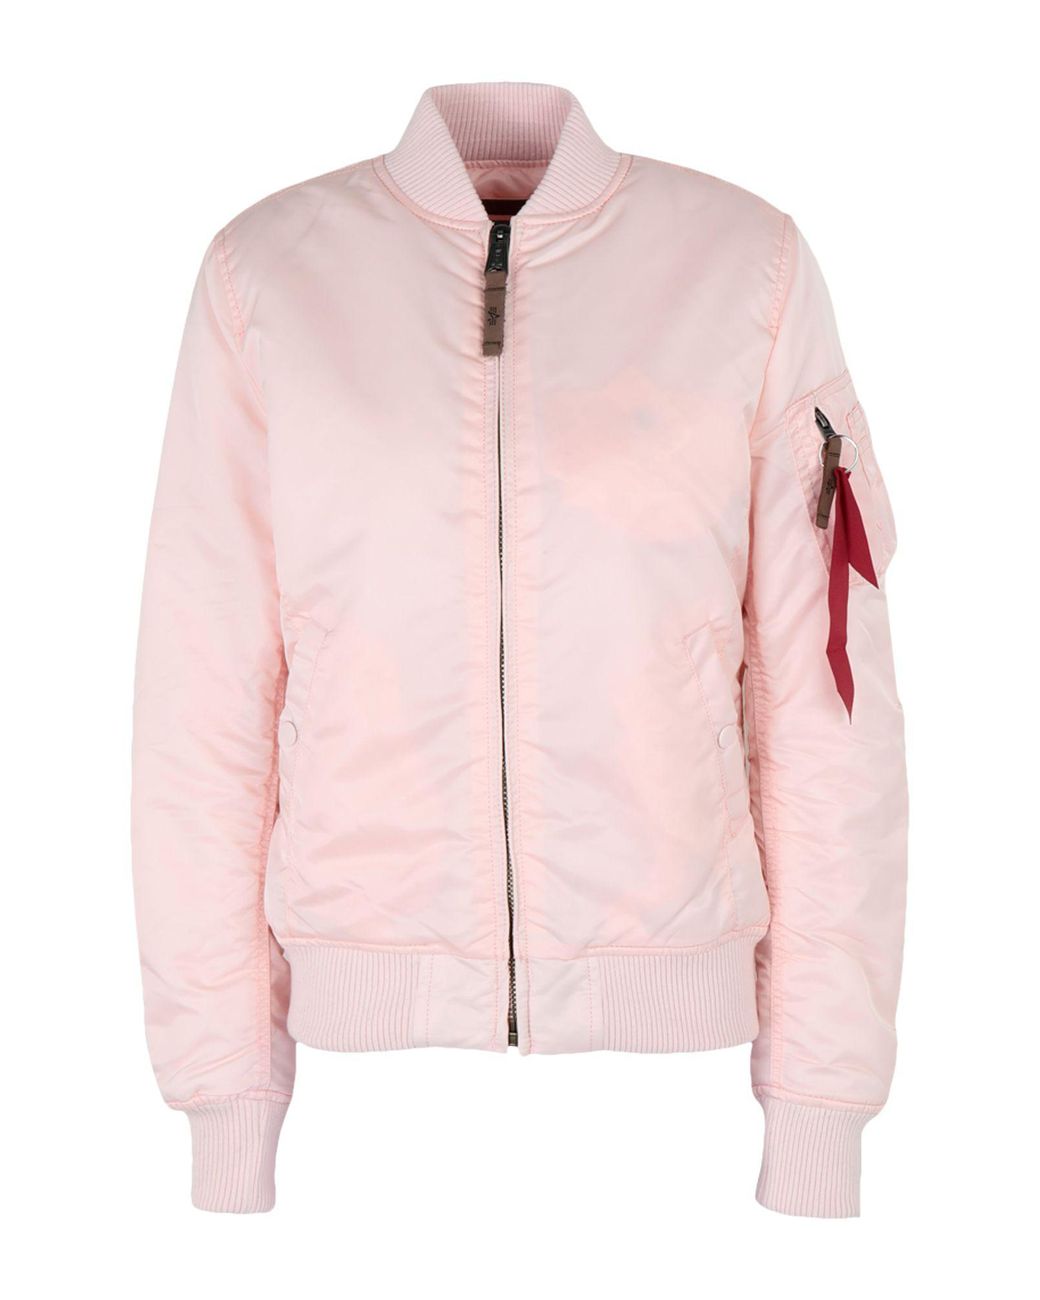 Alpha Industries Synthetic Jacket in Light Pink (Pink) - Save 64% - Lyst